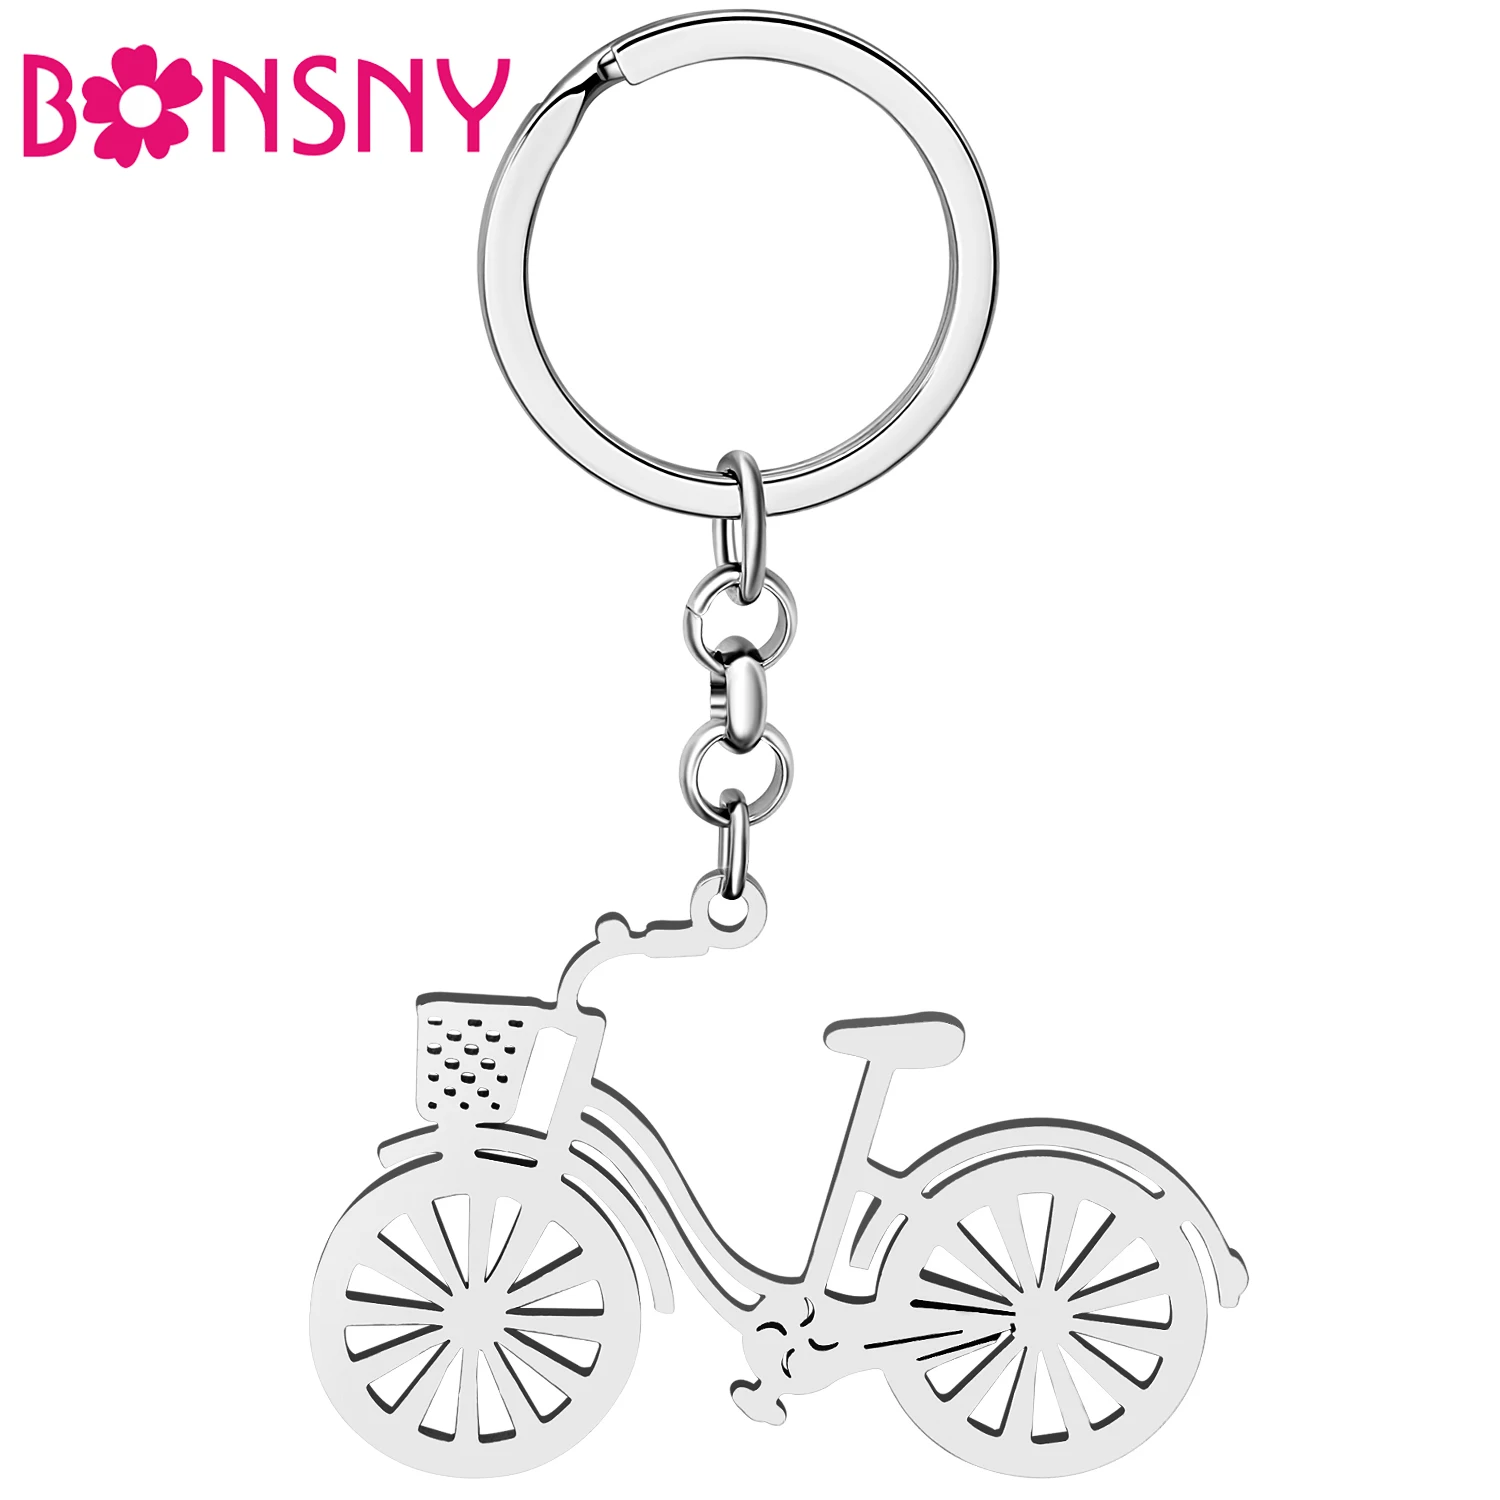 

Bonsny Stainless Steel Silver-plated Novelty Bicycles Keychains Bag Charm Keyring Key Chains Decorations For Women Friend Gifts